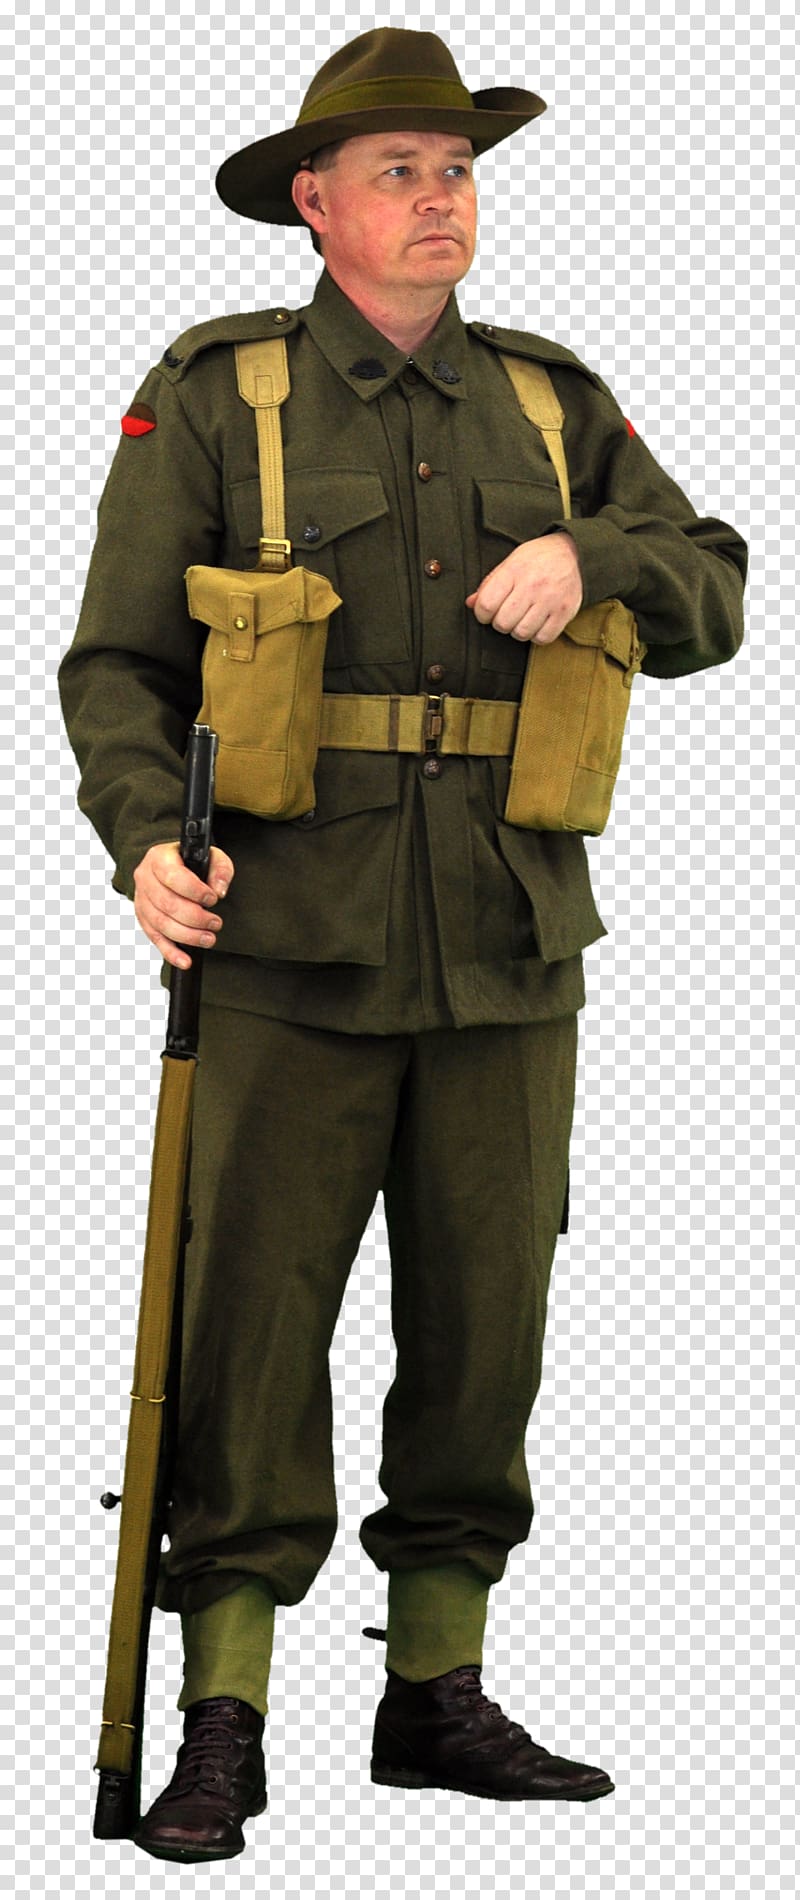 Soldier Second World War Military uniform Army, army soldiers transparent background PNG clipart